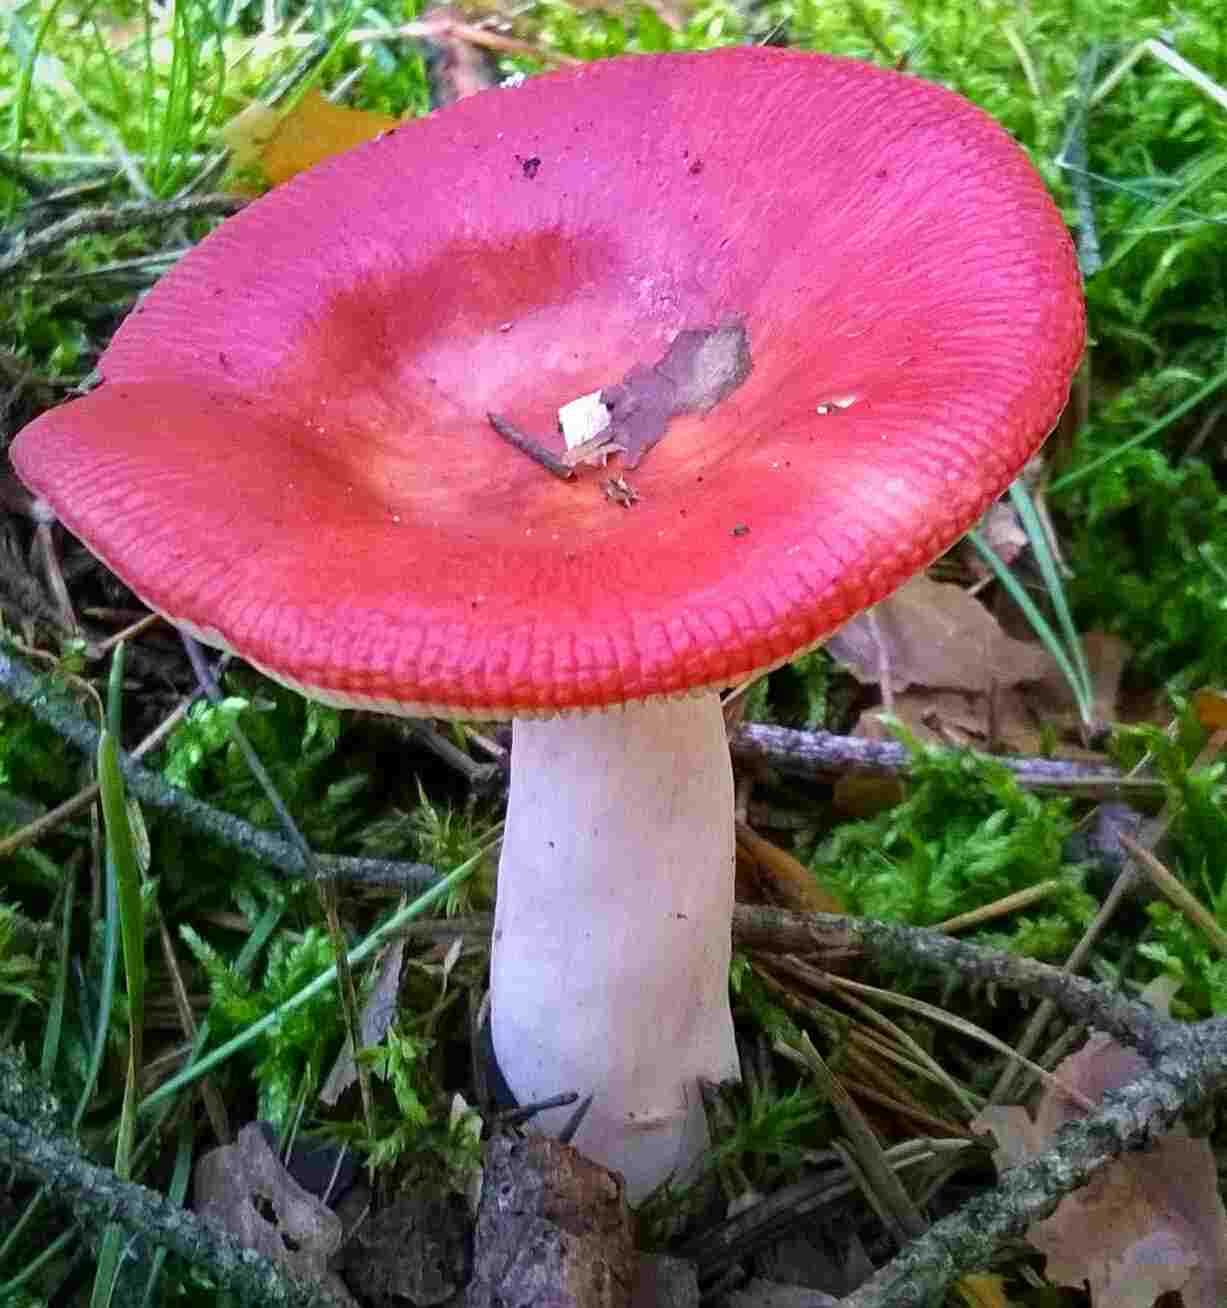 Decomposers in The Tundra: As a Primary Decomposer, Arctic Russula (Russula arctica) is Involved in Arctic Natural Recycling (Credit: MichalPL 2014 .CC BY-SA 4.0.)